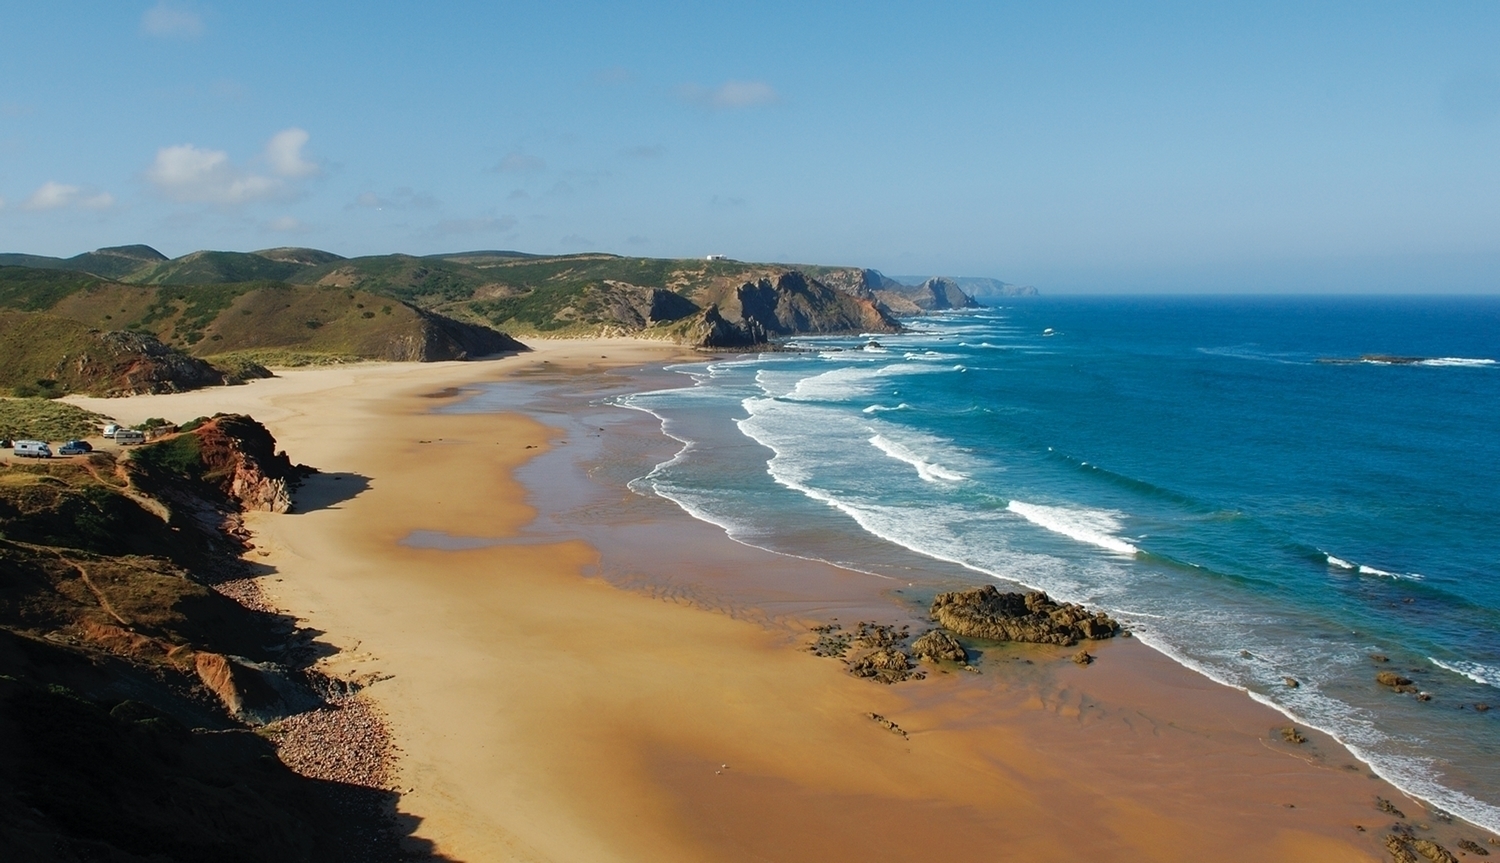 The Top 7 surf beaches in the Algarve, Portugal